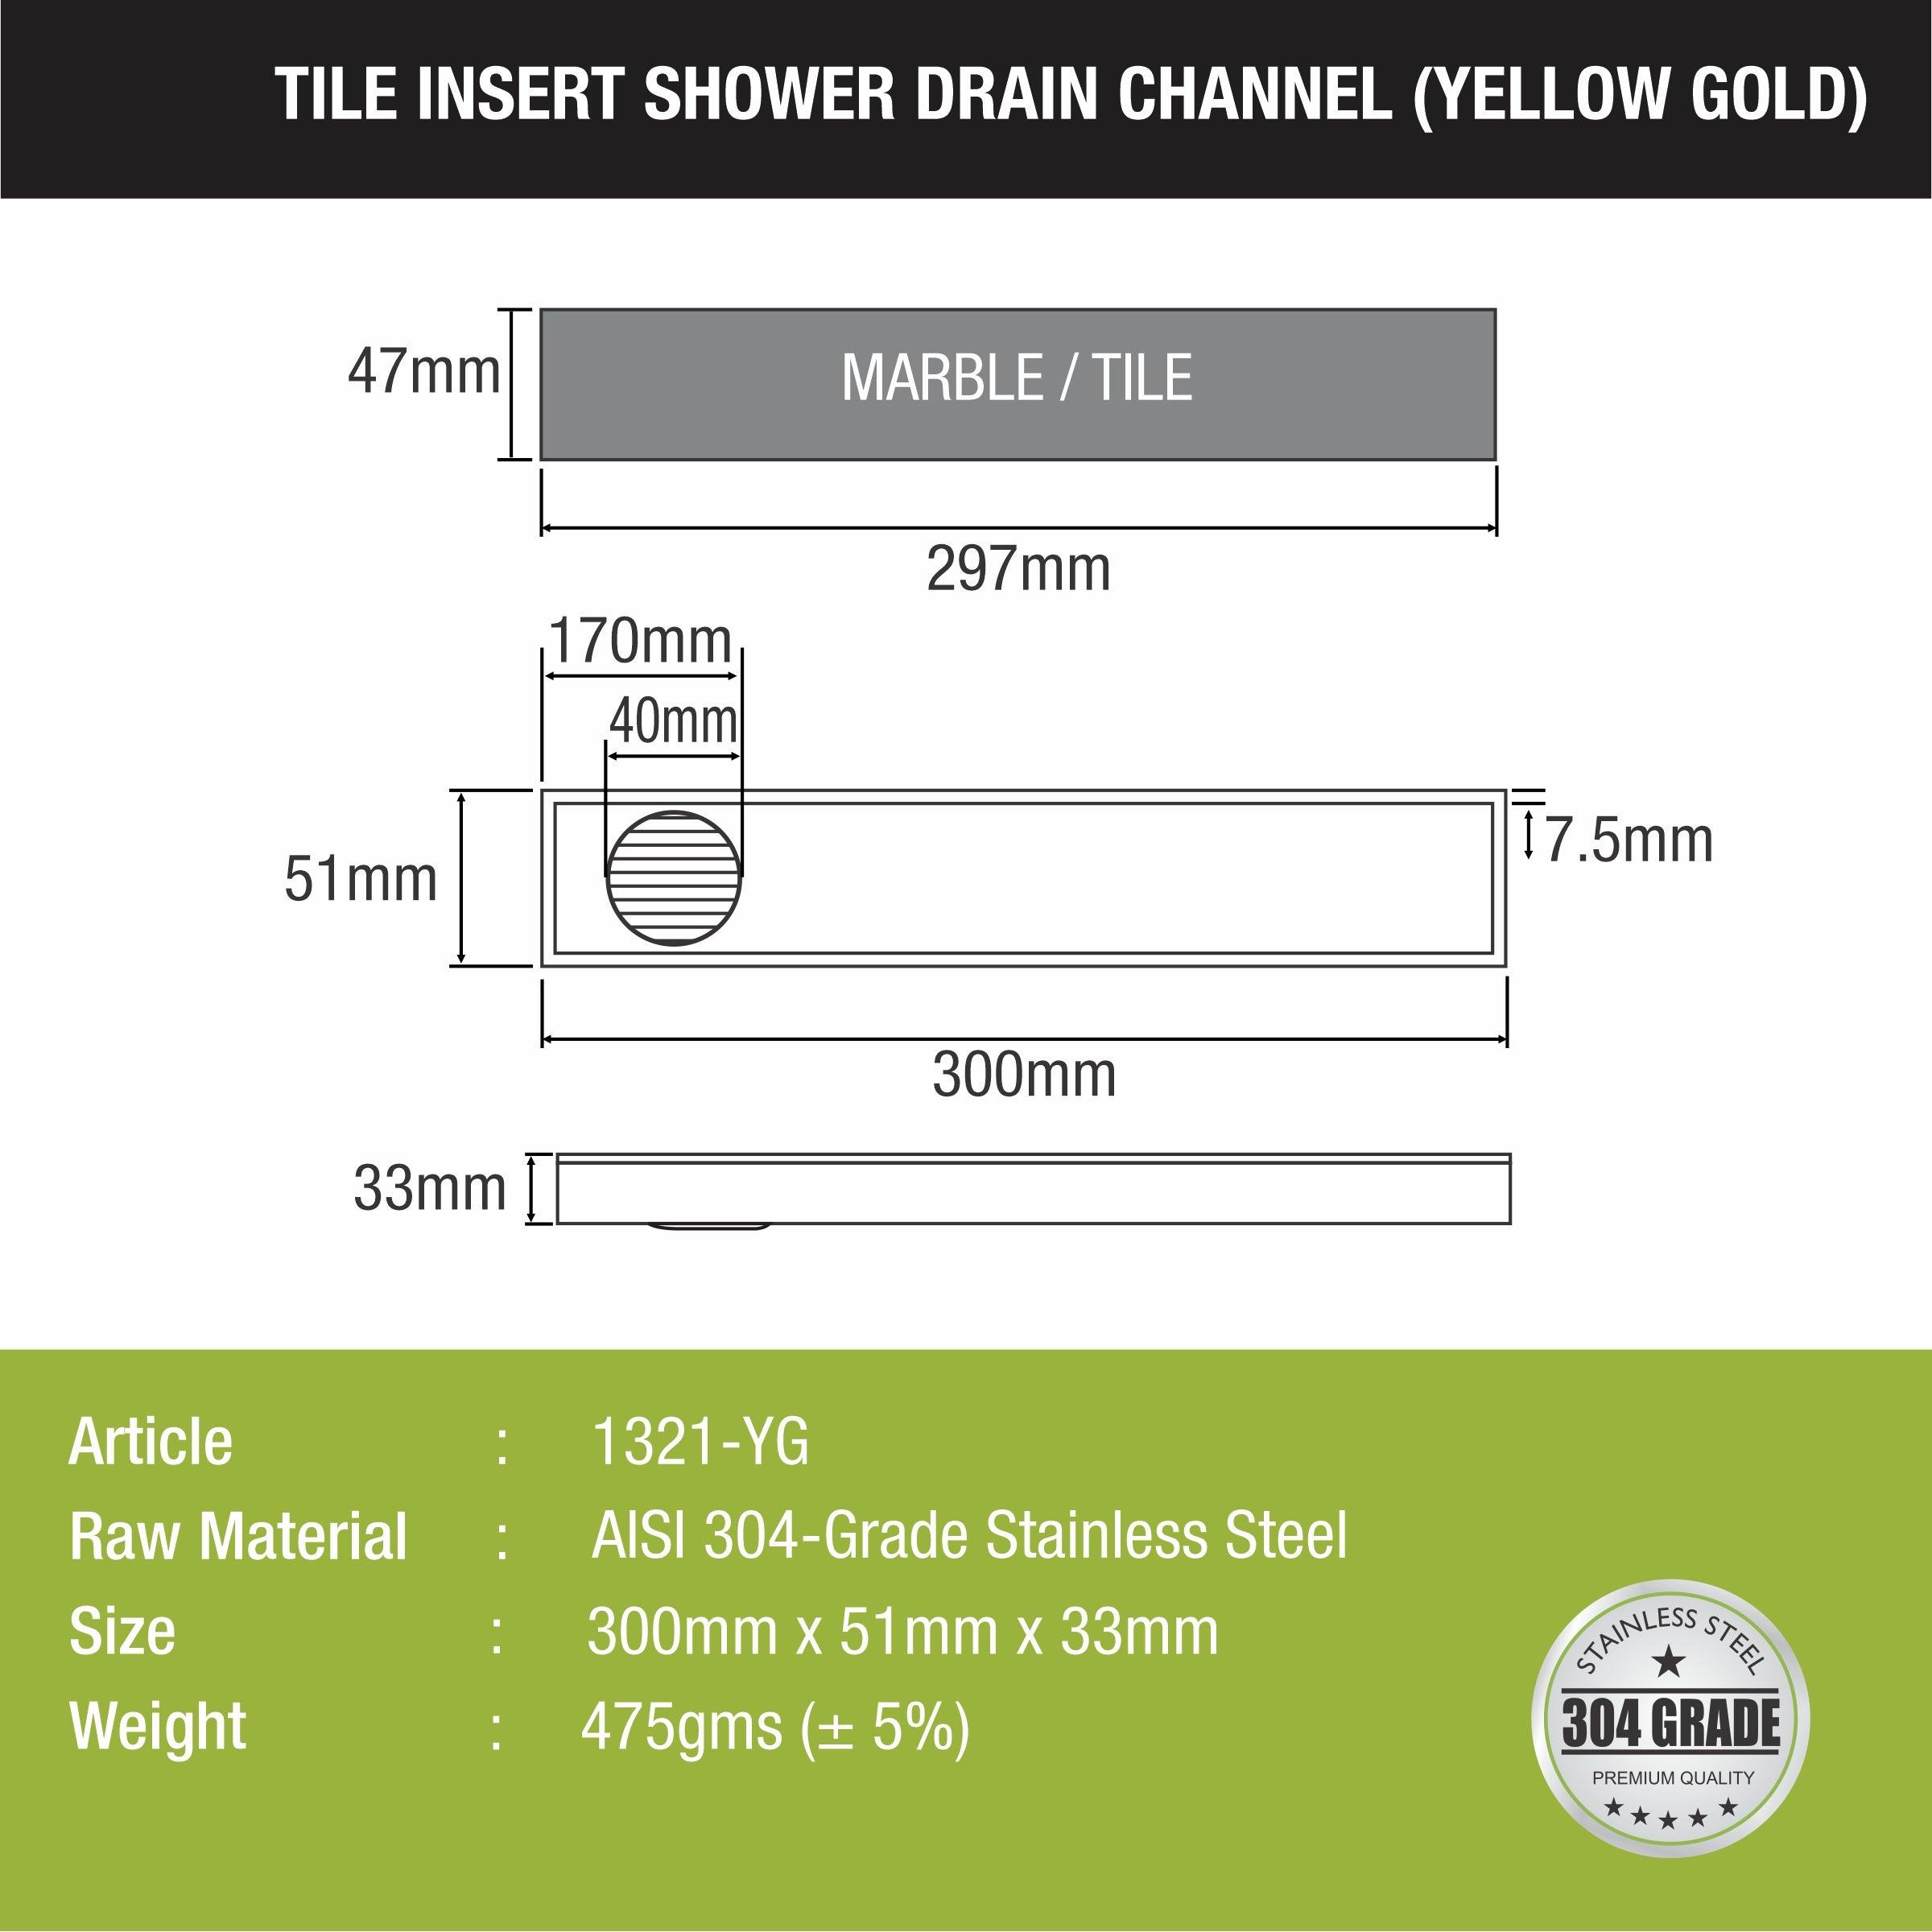 Tile Insert Shower Drain Channel - Yellow Gold (12 x 2 Inches) sizes and dimensions